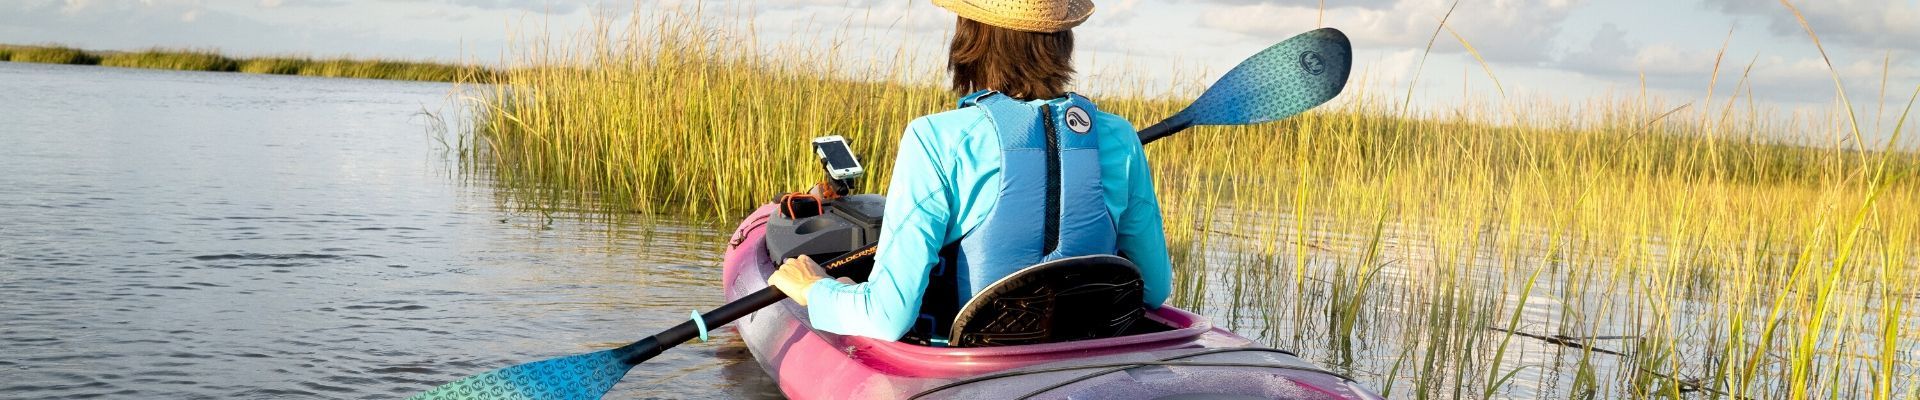 Shop Kayaks  Wild Rock Outfitters